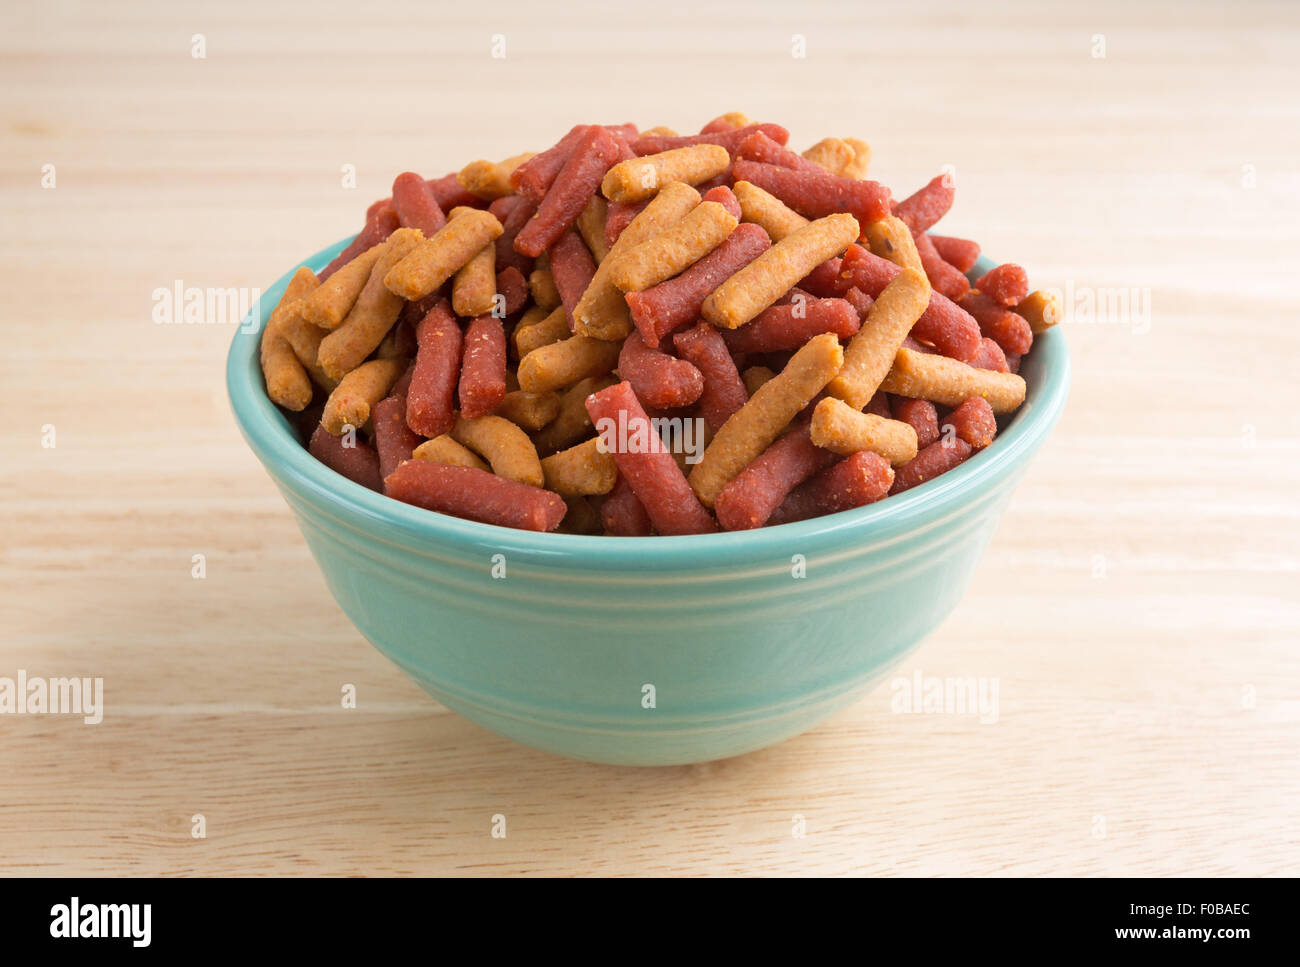 Side view of a small bowl of dog food sitting on a wood floor. Stock Photo